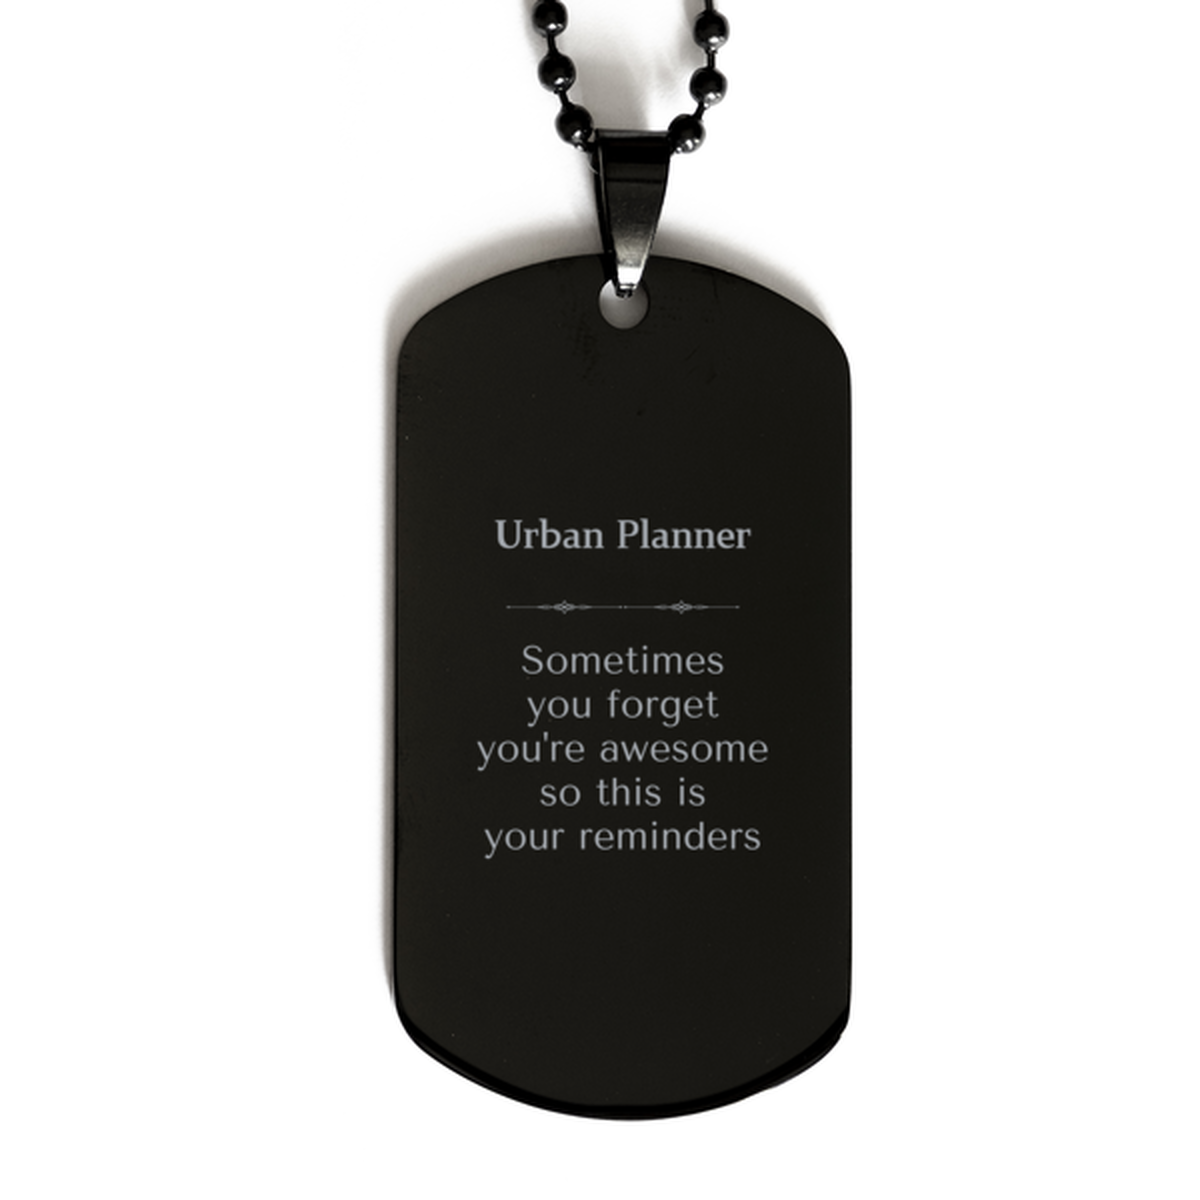 Sentimental Urban Planner Black Dog Tag, Urban Planner Sometimes you forget you're awesome so this is your reminders, Graduation Christmas Birthday Gifts for Urban Planner, Men, Women, Coworkers